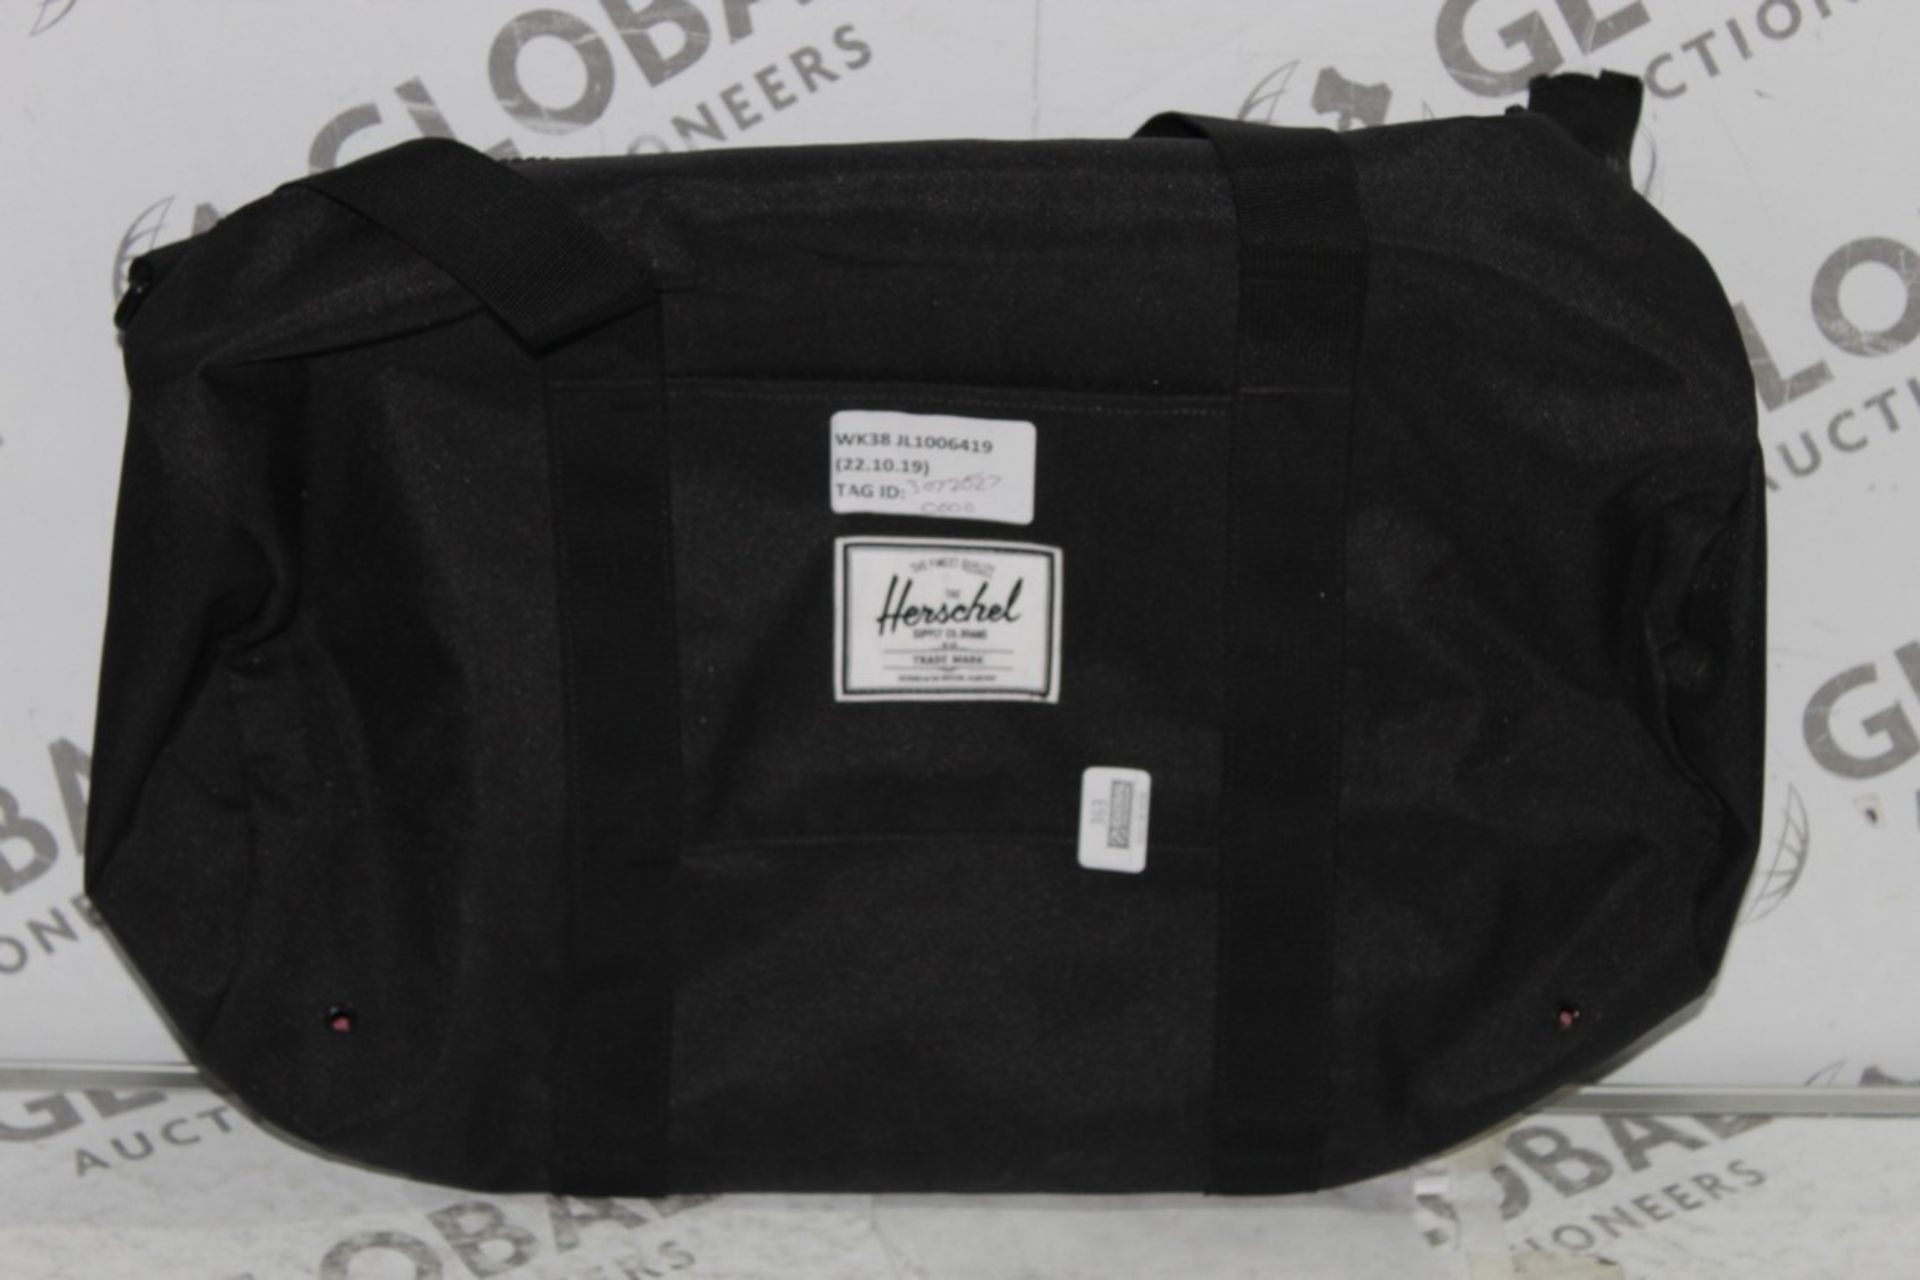 Herschel Original Trademark Holdall RRP £60 (3072627) (Public Viewing and Appraisals Available)